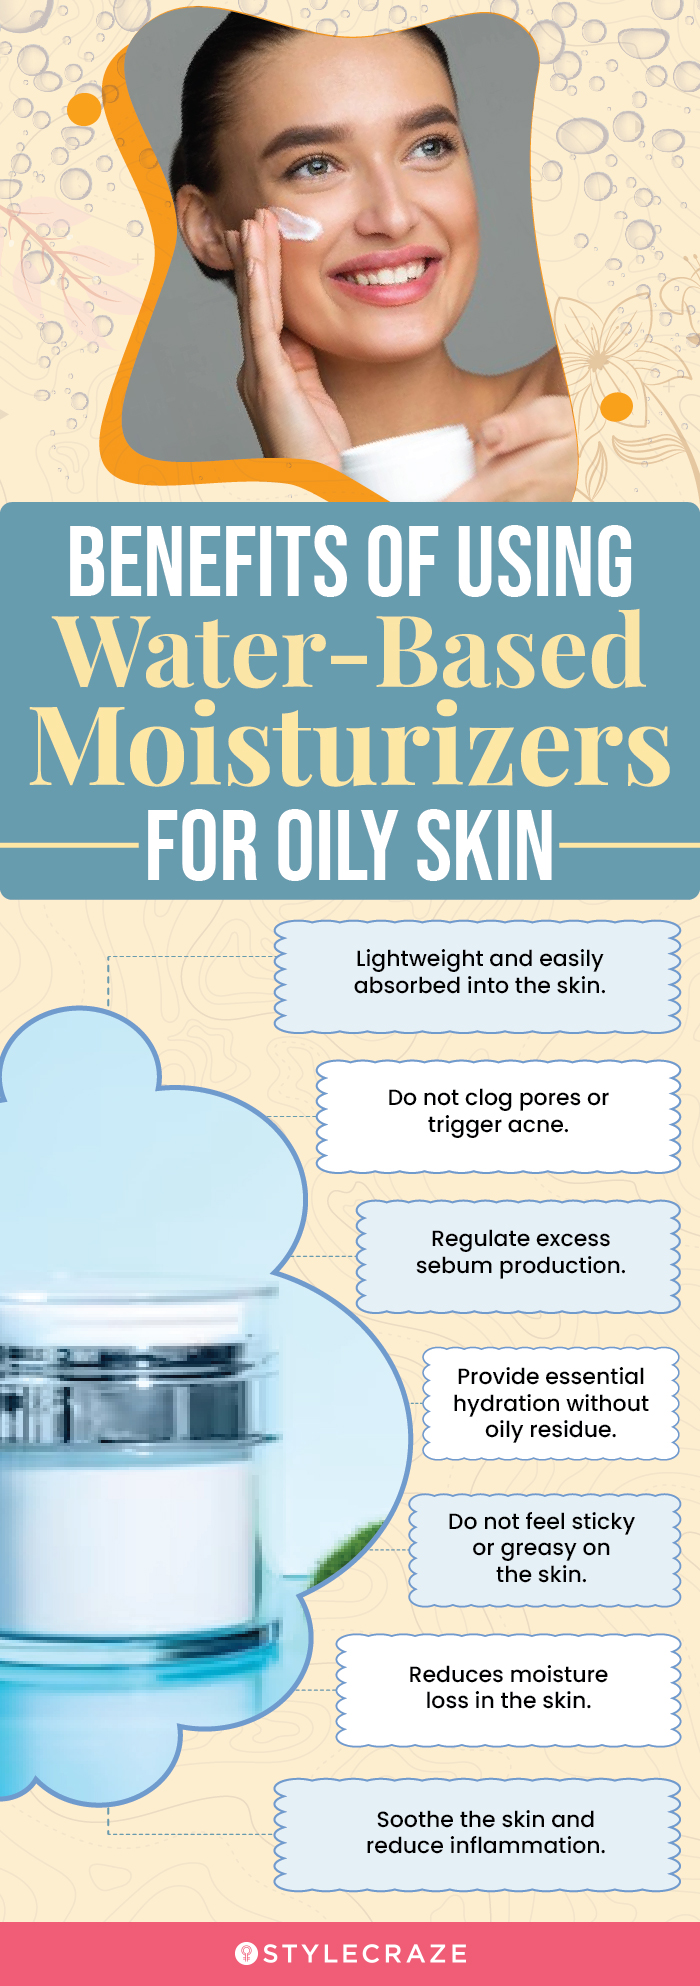 Benefits Of Using Water-Based Moisturizers For Oily Skin (infographic)